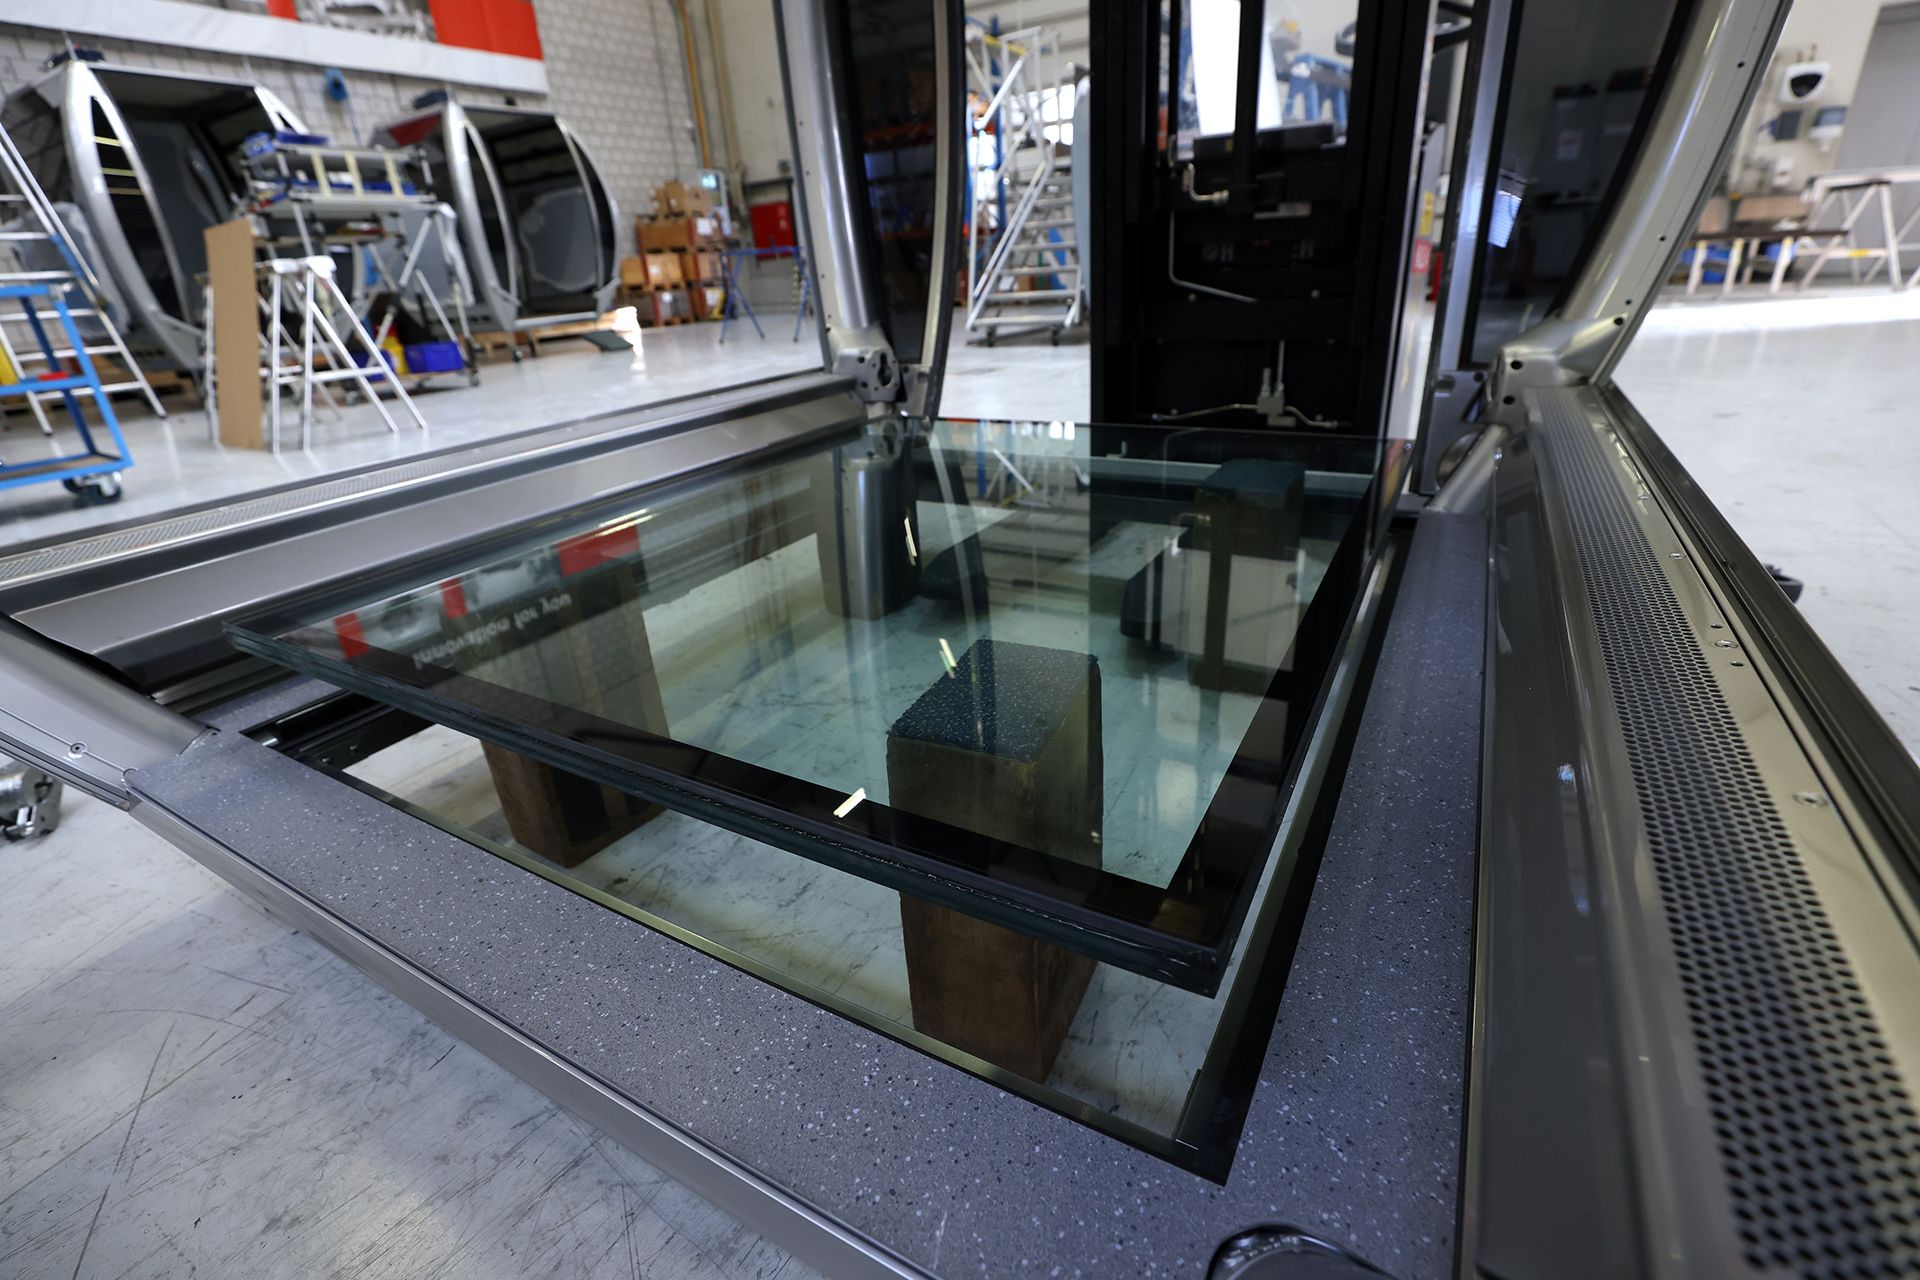 Each cabin's glass bottom is 3cm thick, has three layers of laminated glass, and weighs 100kg.